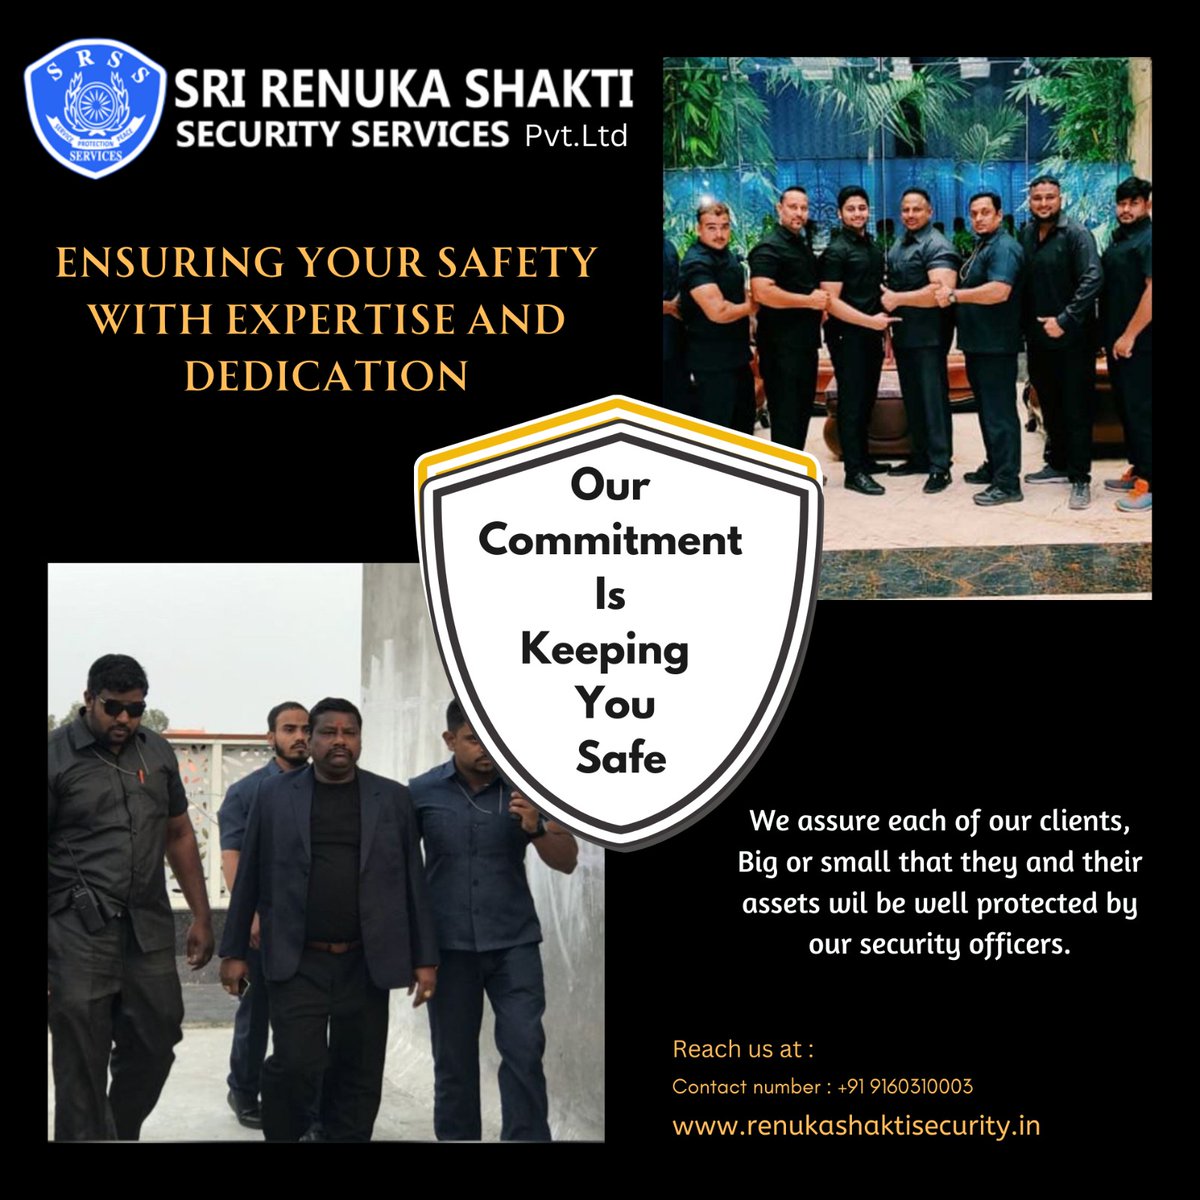 🛡️ Your Safety, Our Expertise! 🌟

At Sri Renuka Shakti Security Services, we don't compromise when it comes to your security. Here's what sets us apart
#SecurityServices #ExpertiseInSafety #DedicationToProtection #YourSafetyMatters #PeaceOfMind #SafeguardingYou #findapro